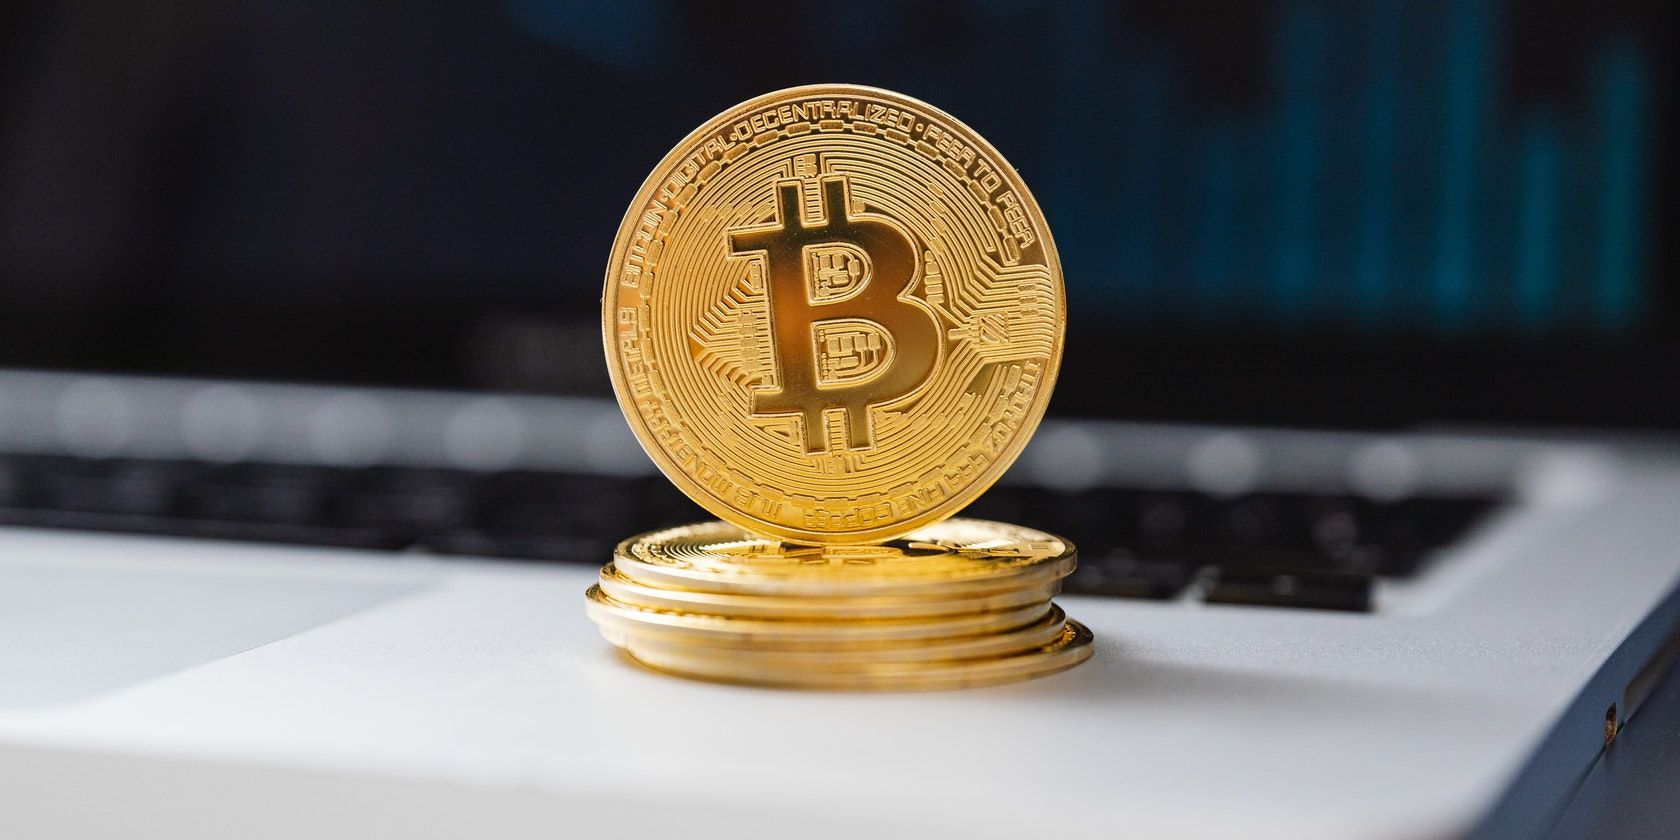 Pexels stock image of a Bitcoin sitting on top of a small stack of bitcoins, on a laptop